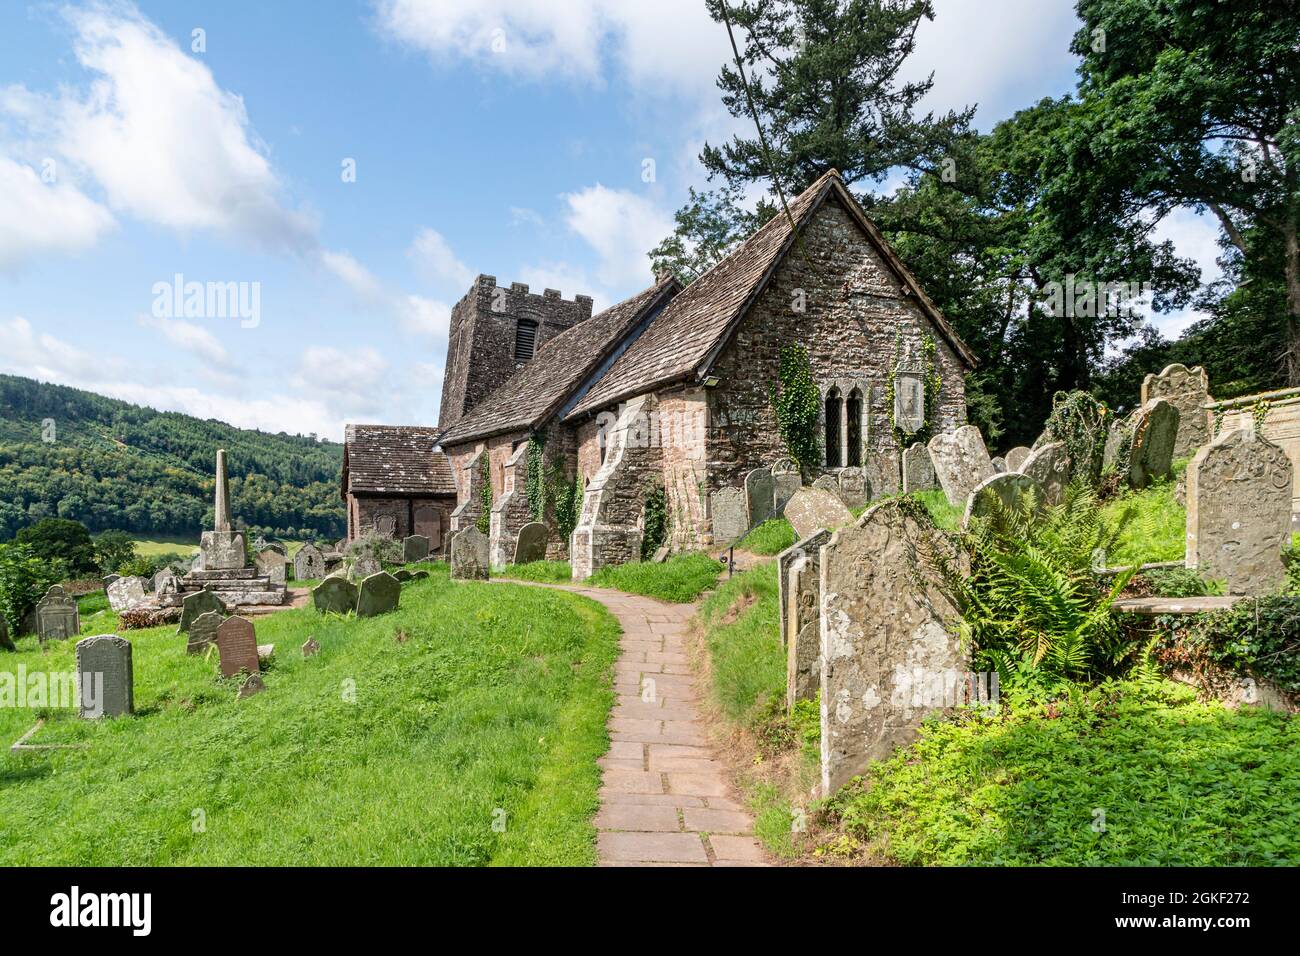 The Church of St Martin, Cwmyoy, Monmouthshire, Stock Photo